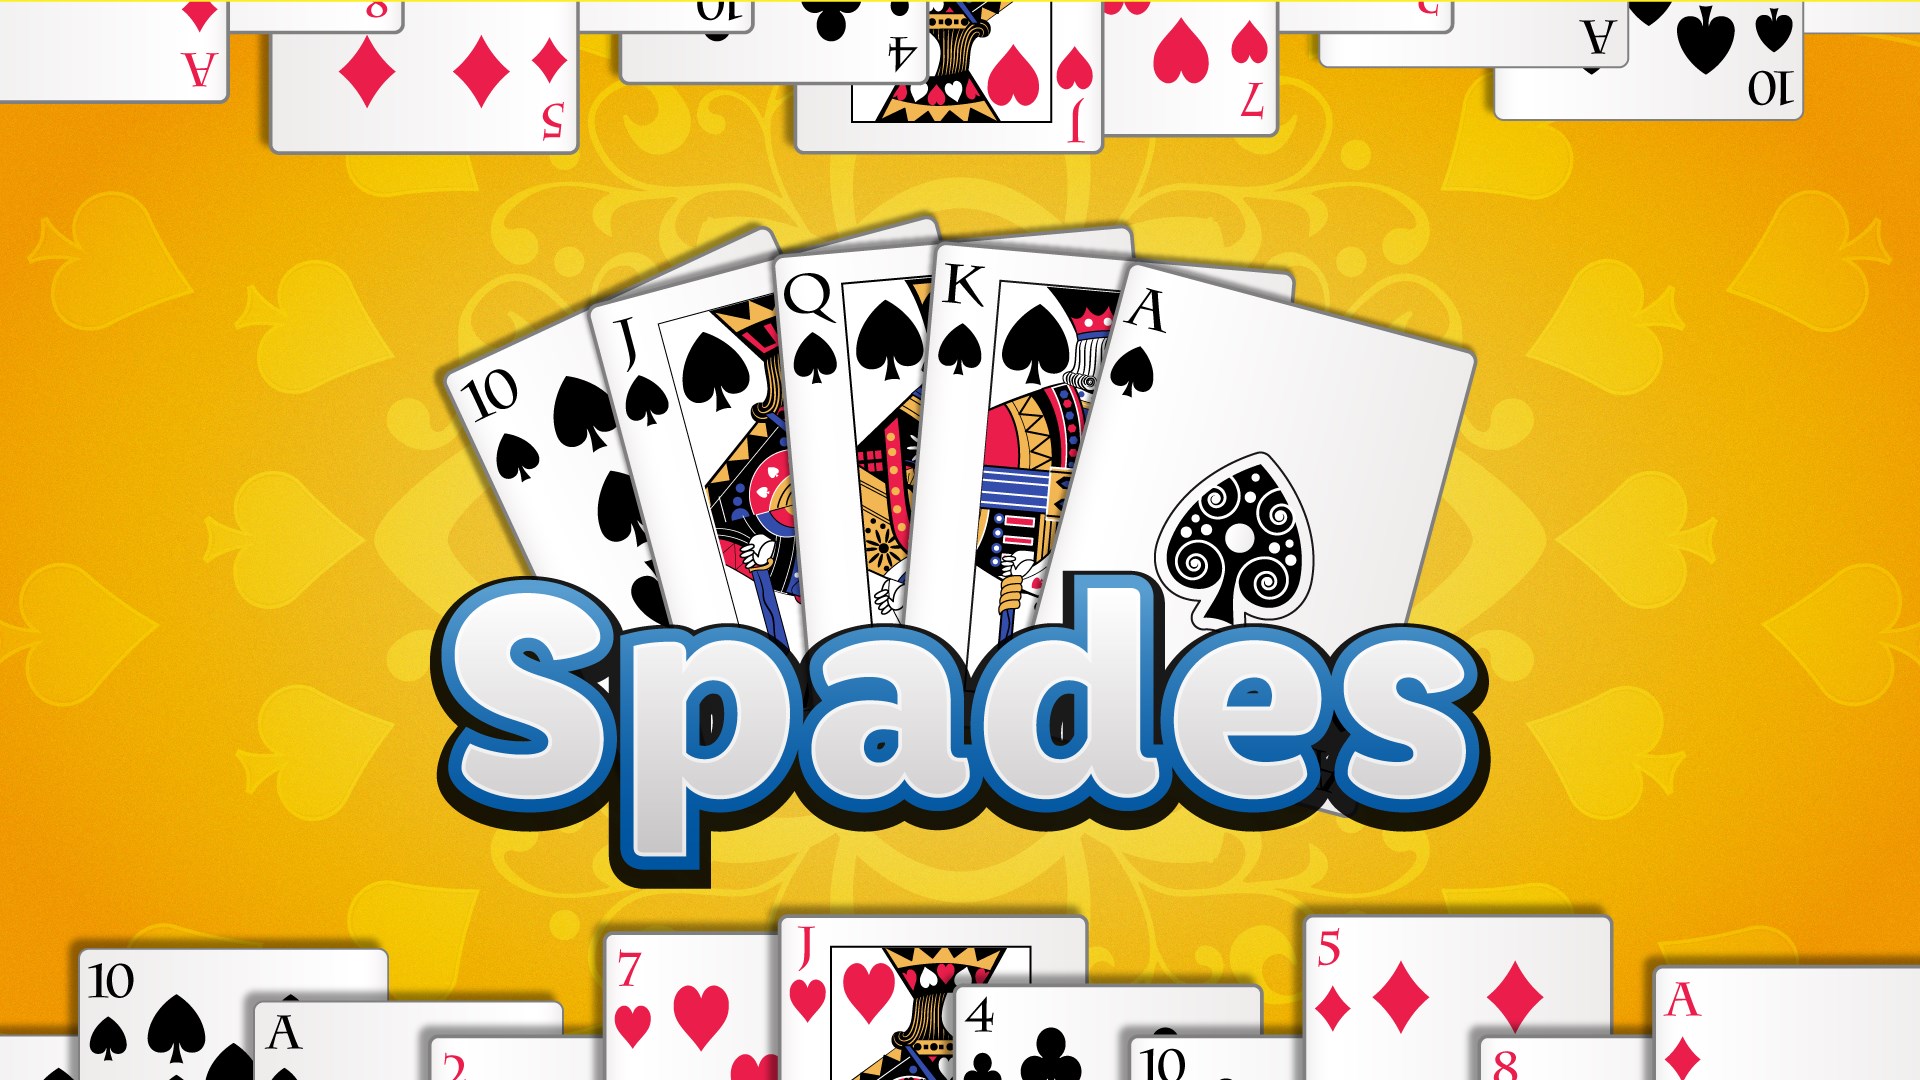 Play spades free online games